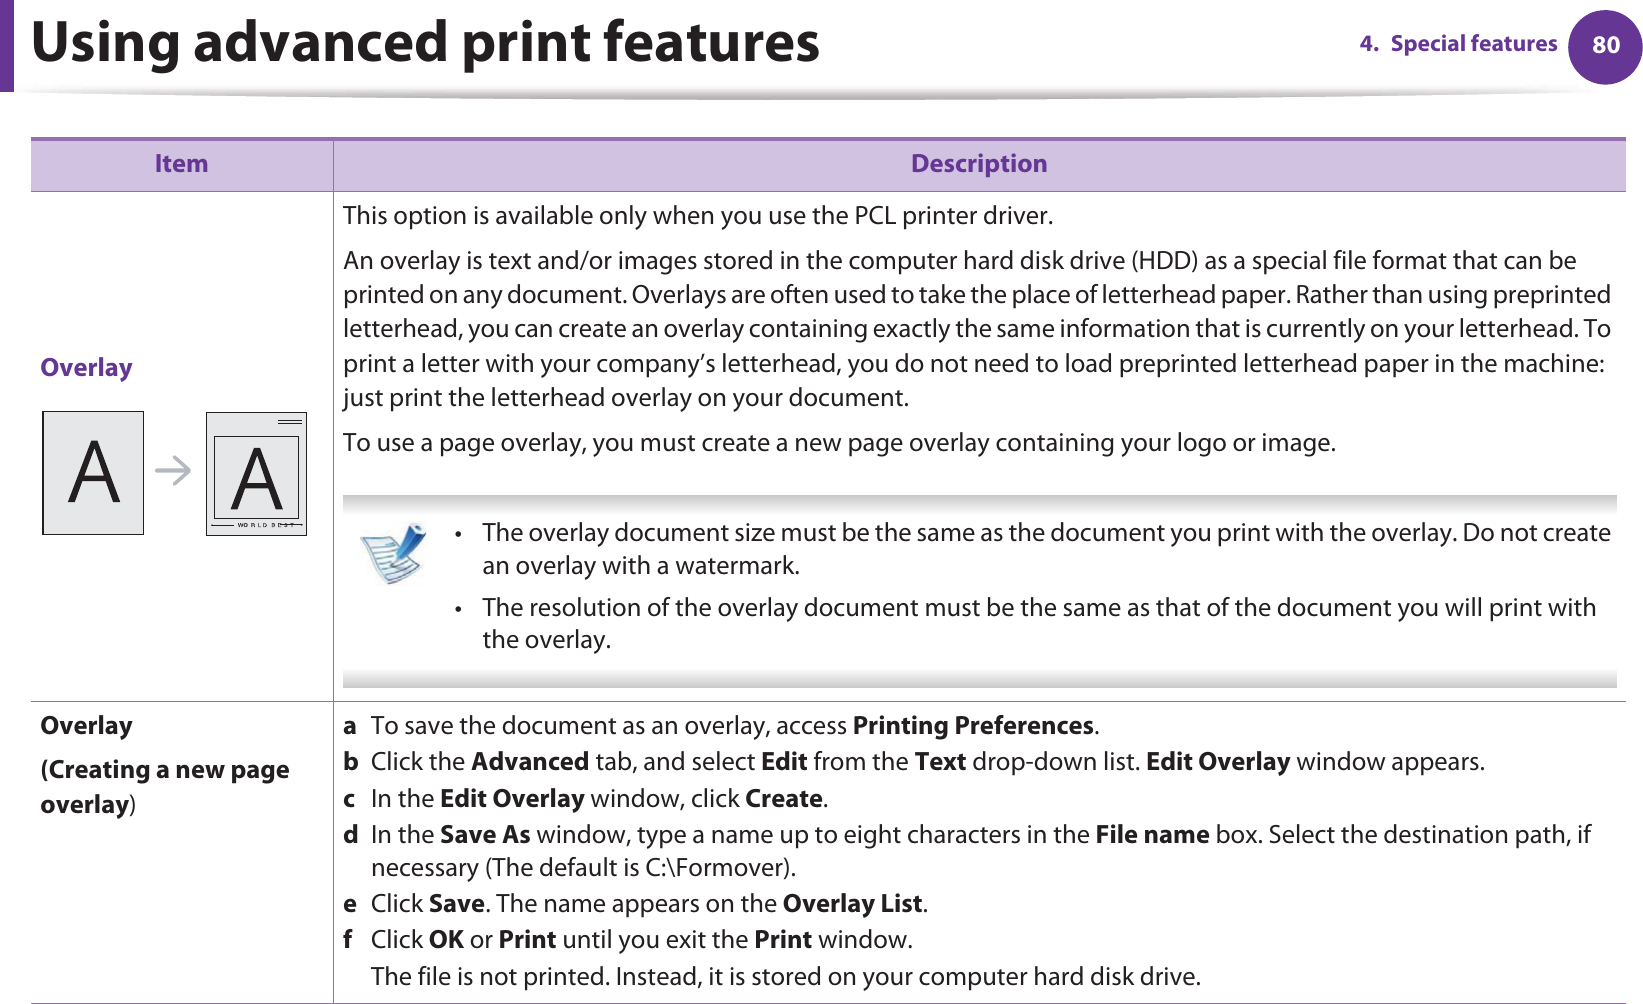 Using advanced print features 804. Special featuresOverlayThis option is available only when you use the PCL printer driver.An overlay is text and/or images stored in the computer hard disk drive (HDD) as a special file format that can be printed on any document. Overlays are often used to take the place of letterhead paper. Rather than using preprinted letterhead, you can create an overlay containing exactly the same information that is currently on your letterhead. To print a letter with your company’s letterhead, you do not need to load preprinted letterhead paper in the machine: just print the letterhead overlay on your document.To use a page overlay, you must create a new page overlay containing your logo or image. • The overlay document size must be the same as the document you print with the overlay. Do not create an overlay with a watermark.• The resolution of the overlay document must be the same as that of the document you will print with the overlay. Overlay(Creating a new page overlay)a  To save the document as an overlay, access Printing Preferences.b  Click the Advanced tab, and select Edit from the Text drop-down list. Edit Overlay window appears.c  In the Edit Overlay window, click Create. d  In the Save As window, type a name up to eight characters in the File name box. Select the destination path, if necessary (The default is C:\Formover).e  Click Save. The name appears on the Overlay List. f  Click OK or Print until you exit the Print window.The file is not printed. Instead, it is stored on your computer hard disk drive.Item Description